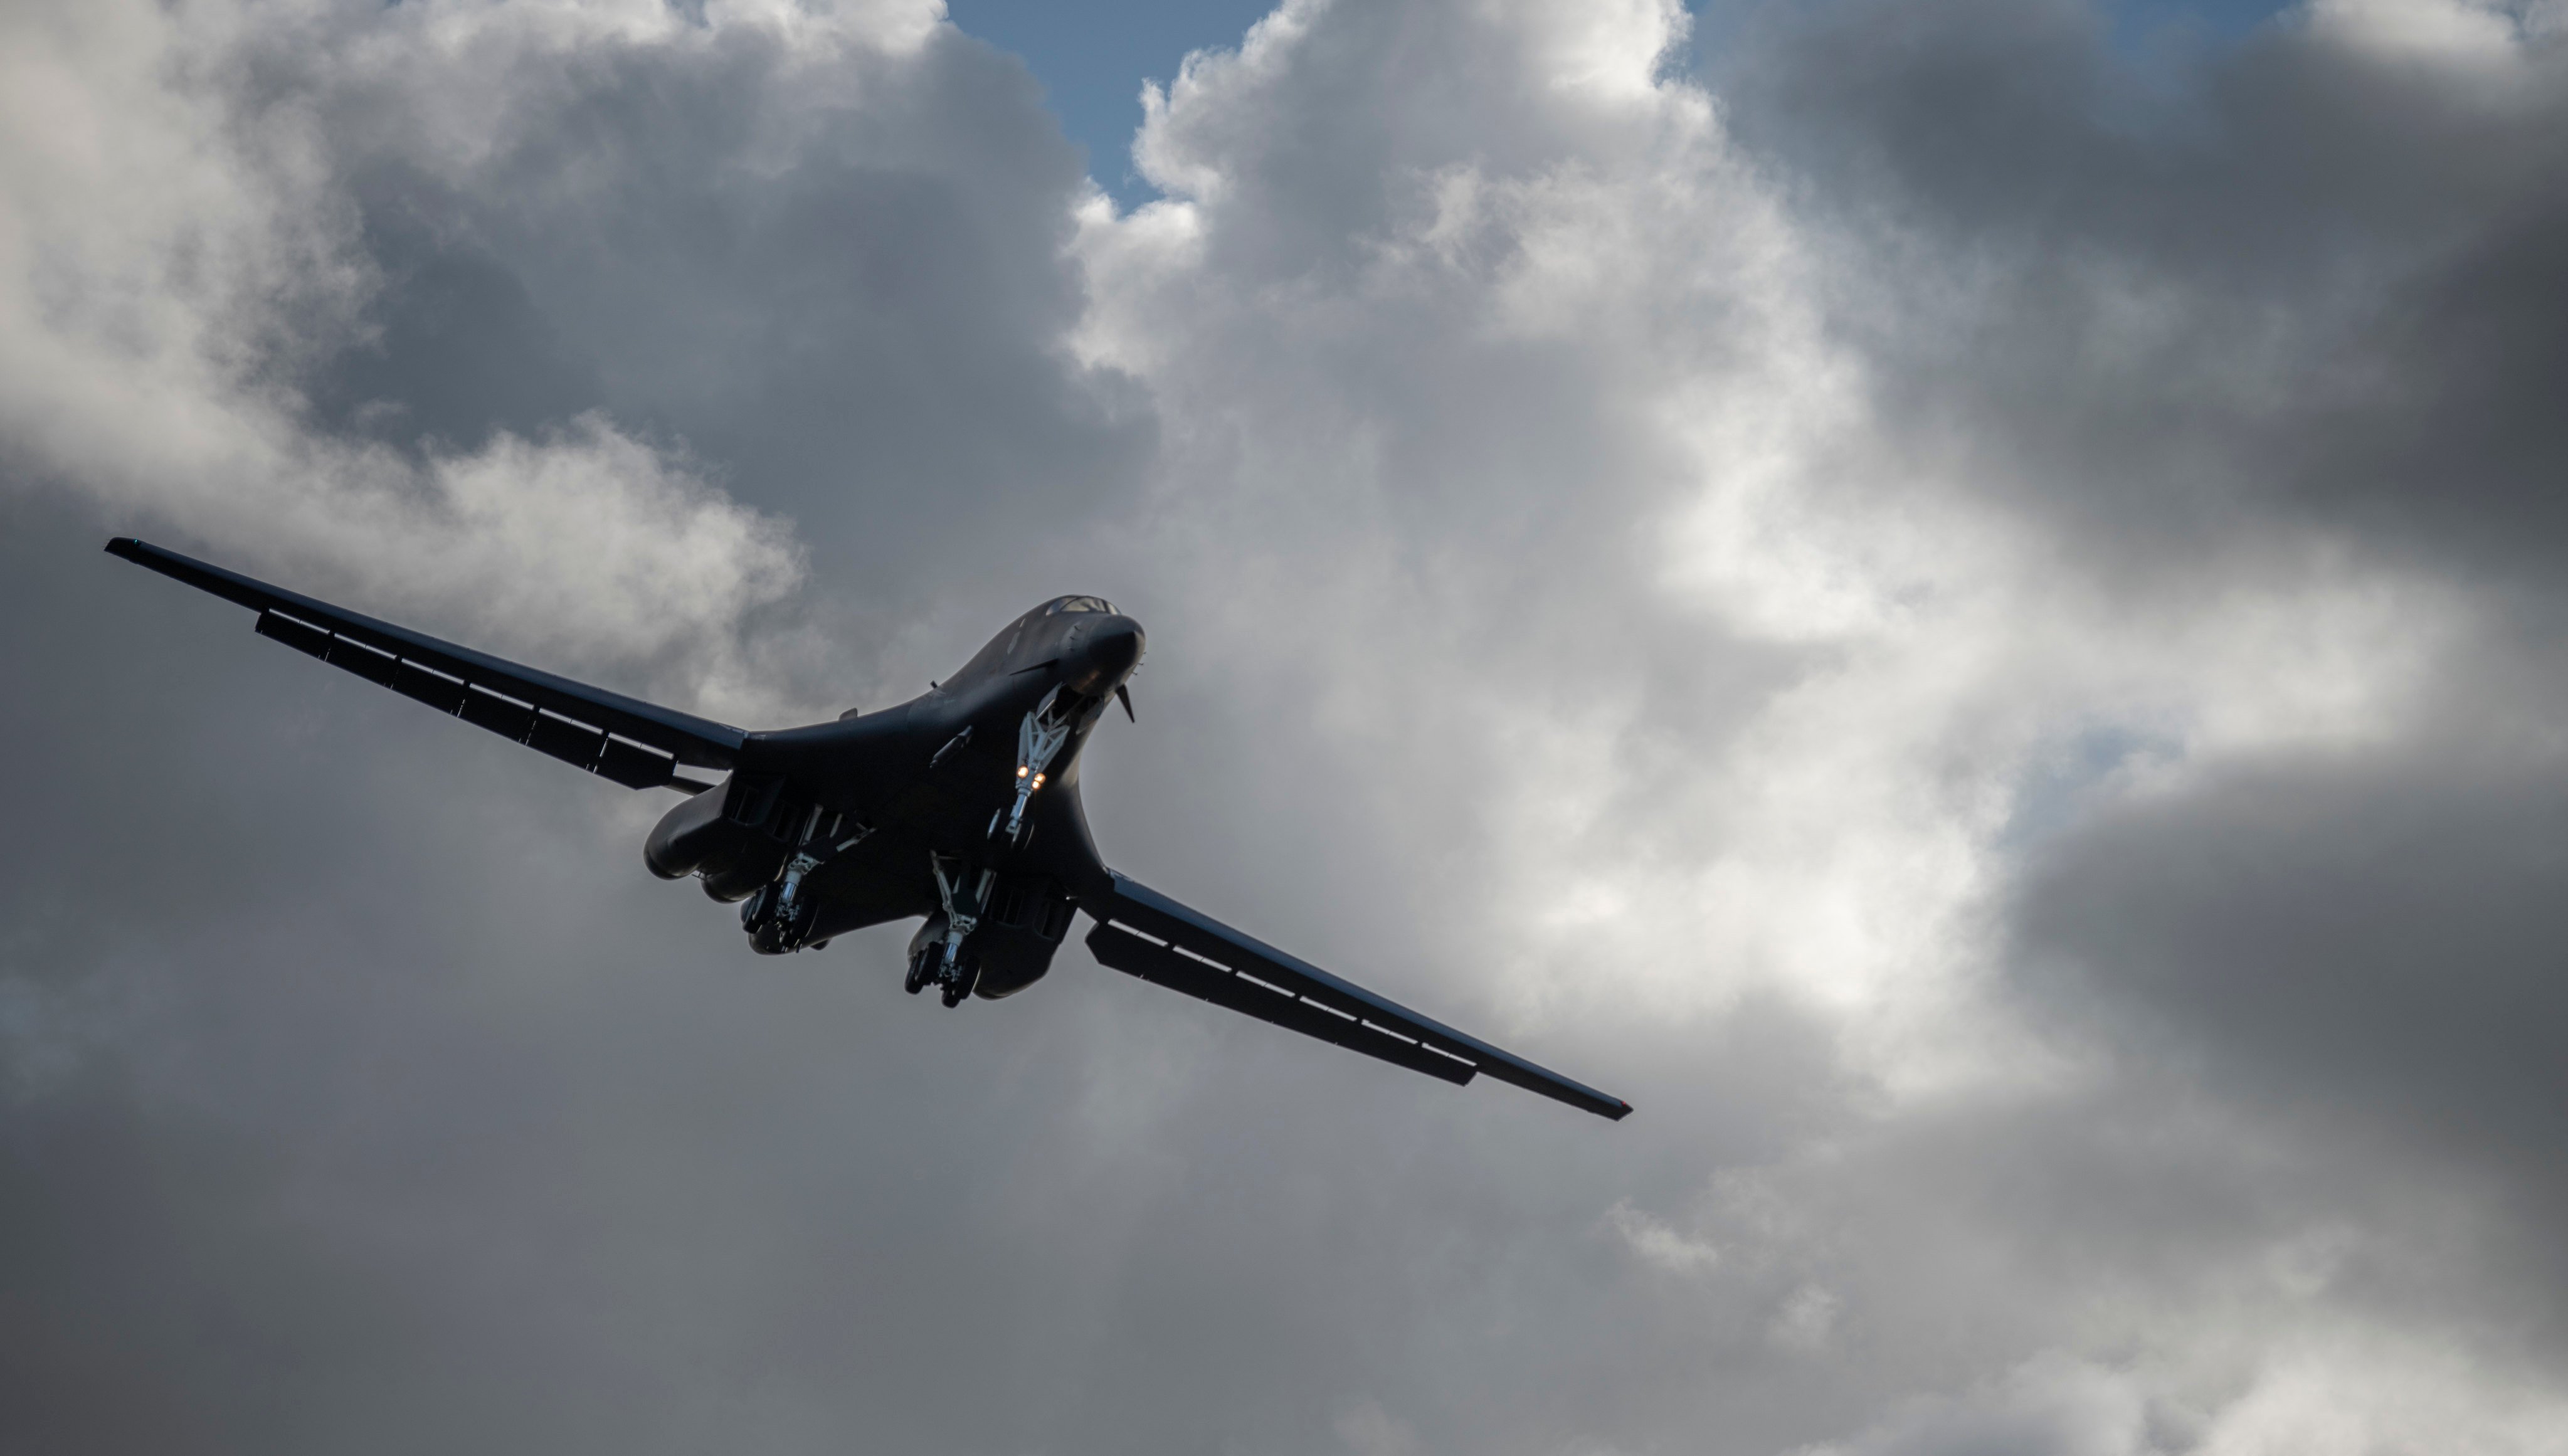 A B-1B Lancer jet prepares to land at Andersen Air Force Base in Guam. Photo: US Air Force